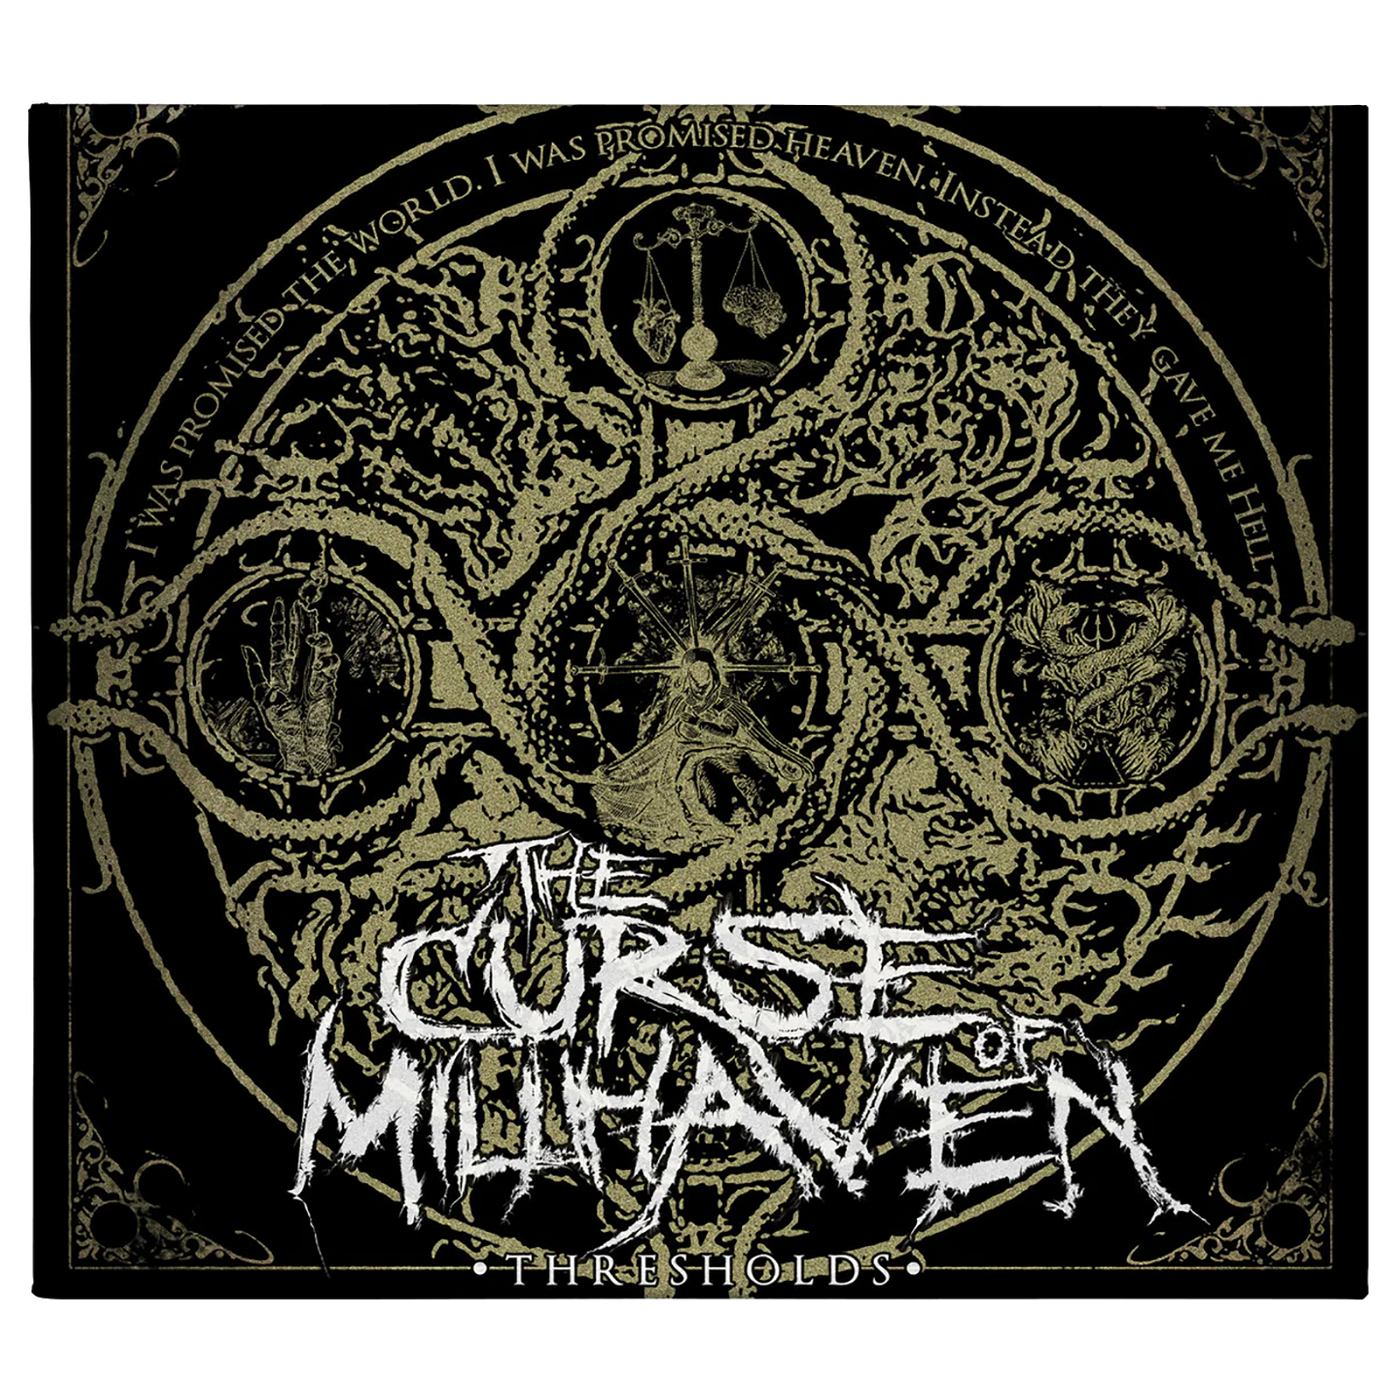 The Curse Of Millhaven 'Thresholds' CD